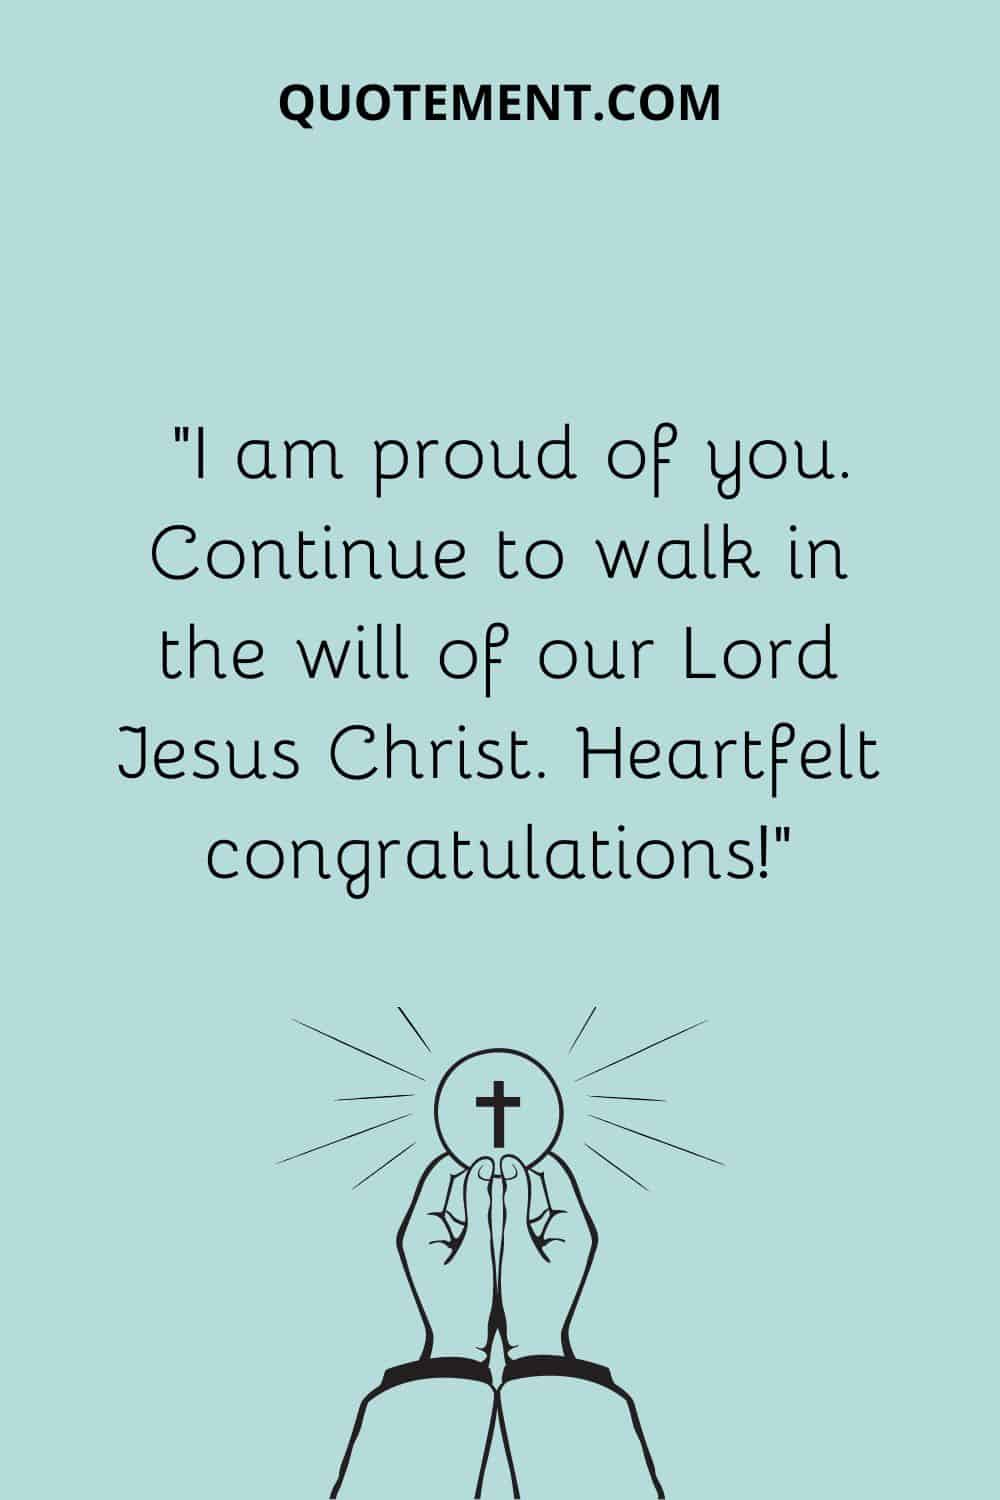 “I am proud of you. Continue to walk in the will of our Lord Jesus Christ. Heartfelt congratulations!”